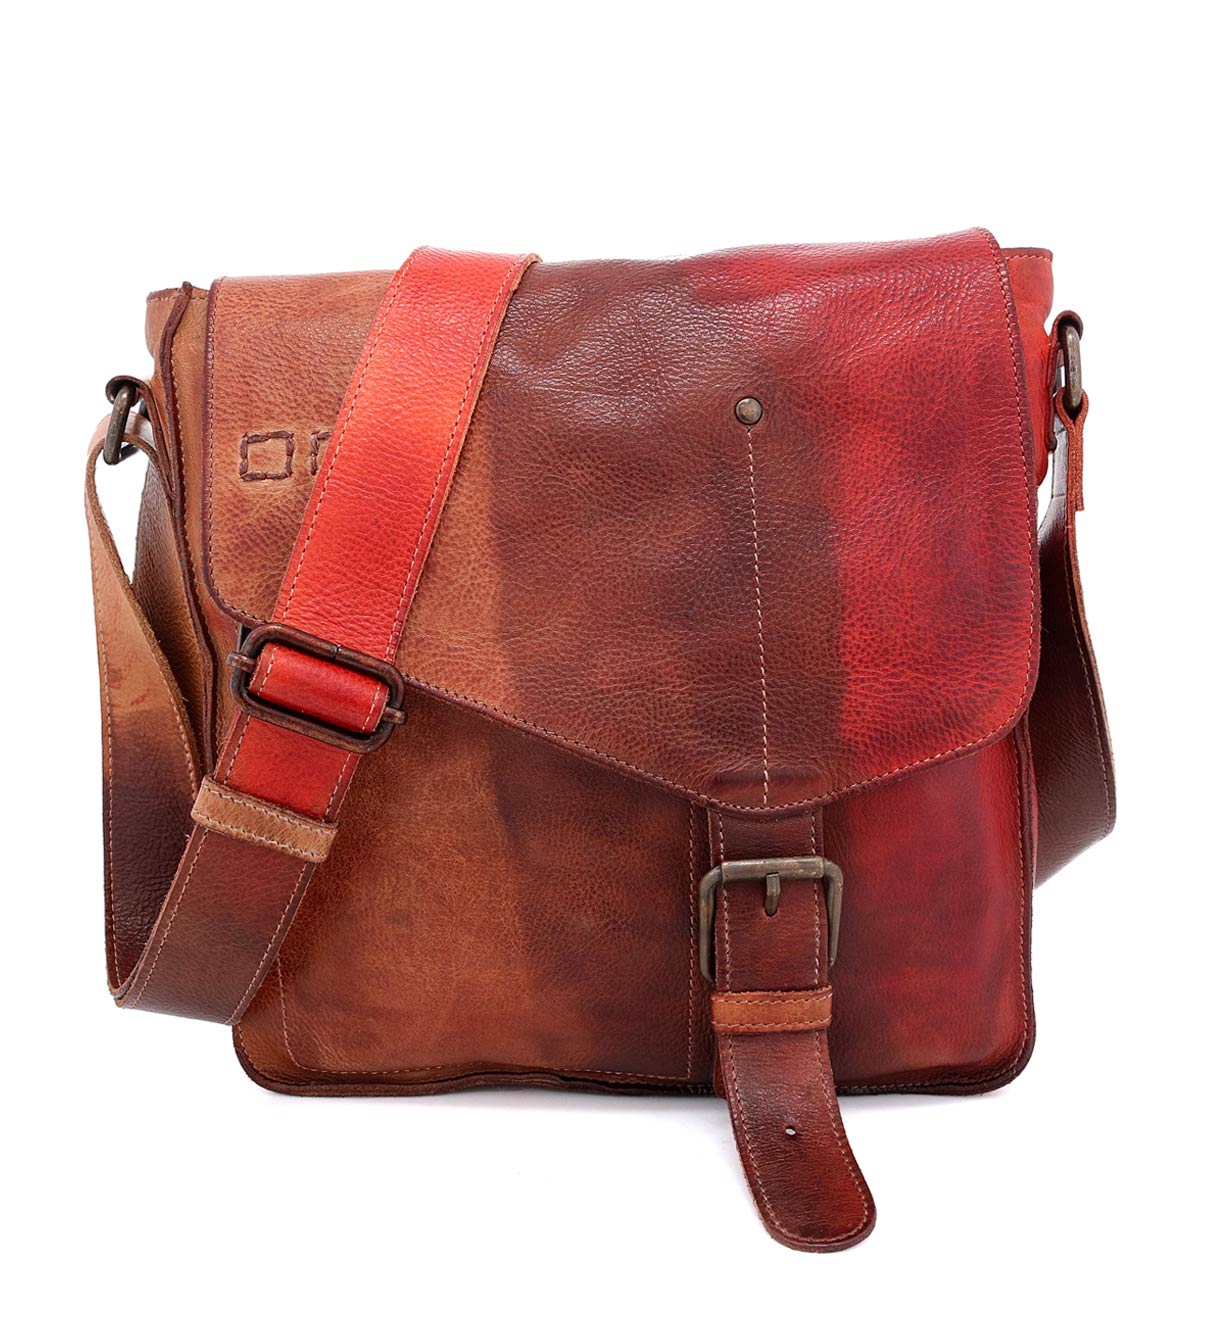 A timeless Venice Beach brown leather messenger bag with a handmade strap by Bed Stu.